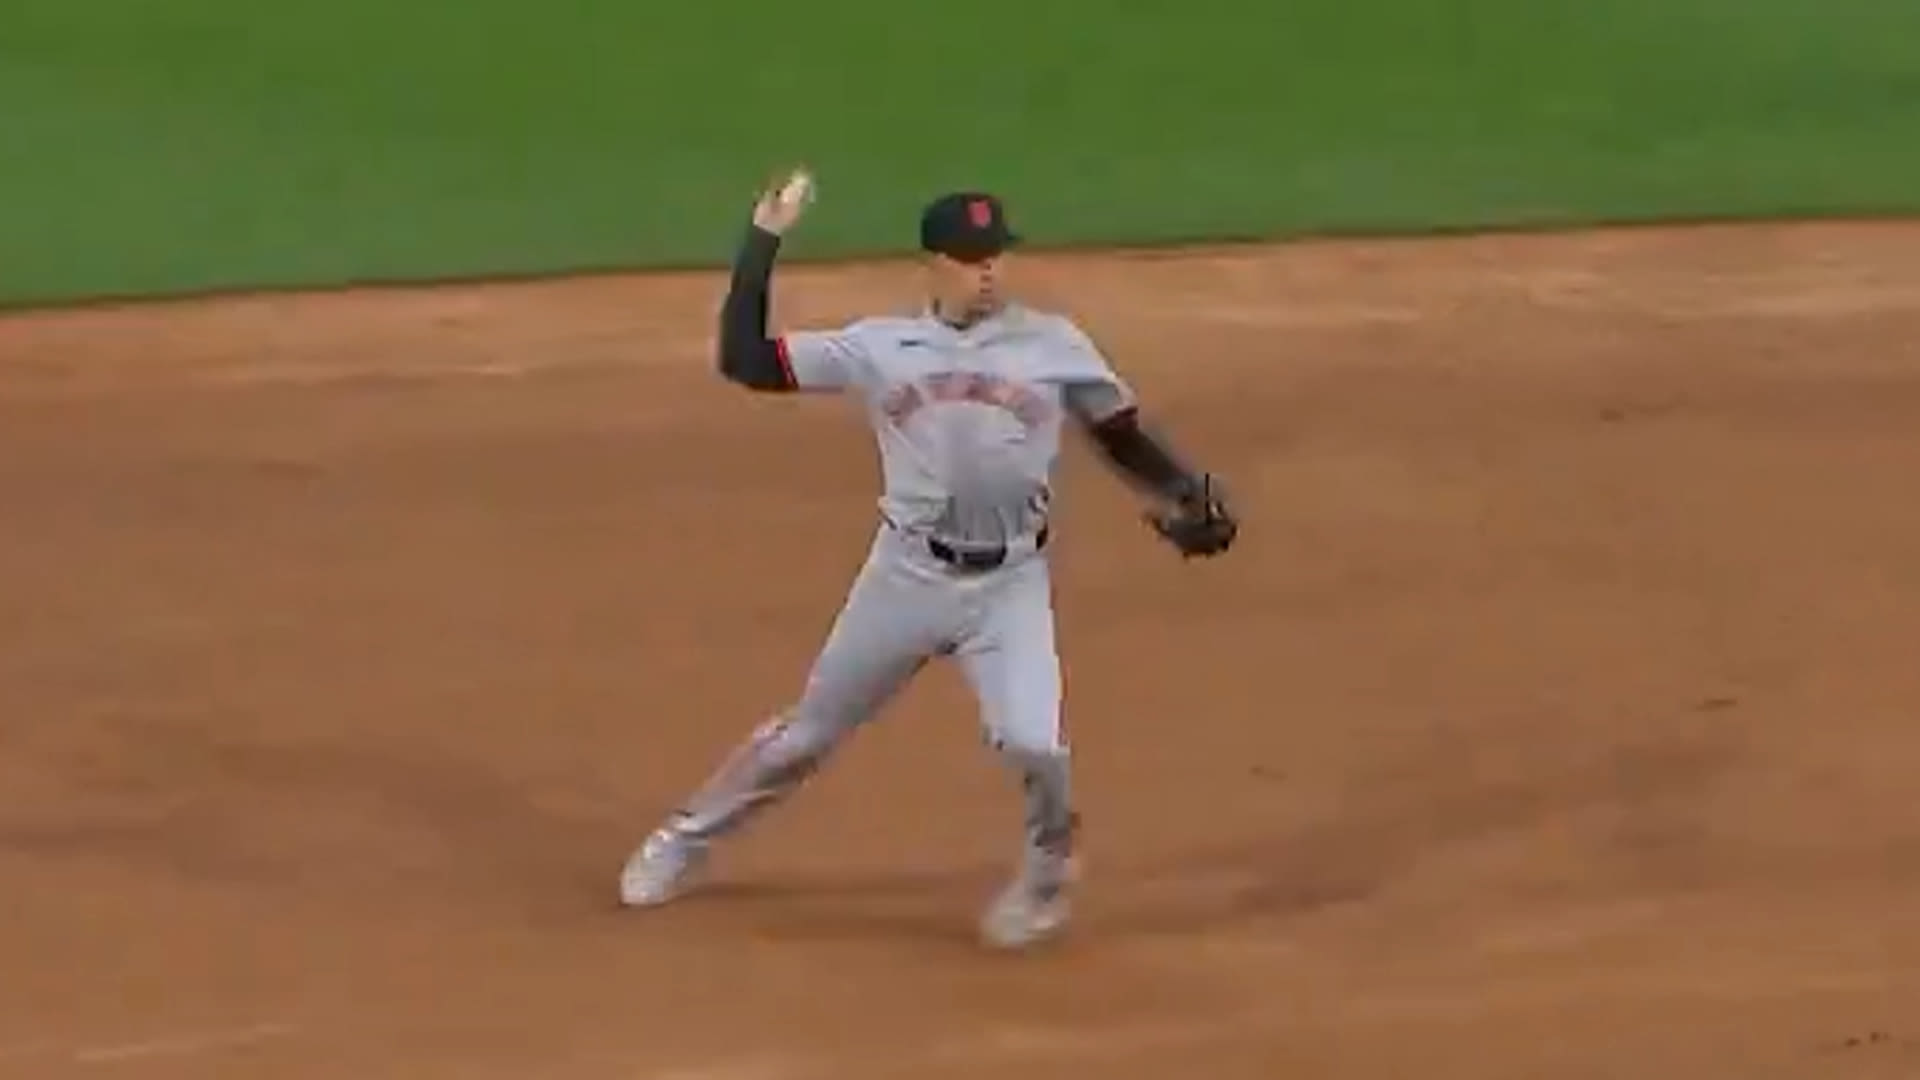 MLB fans in hysterics as Giants shortstop trips and throws ball into stands